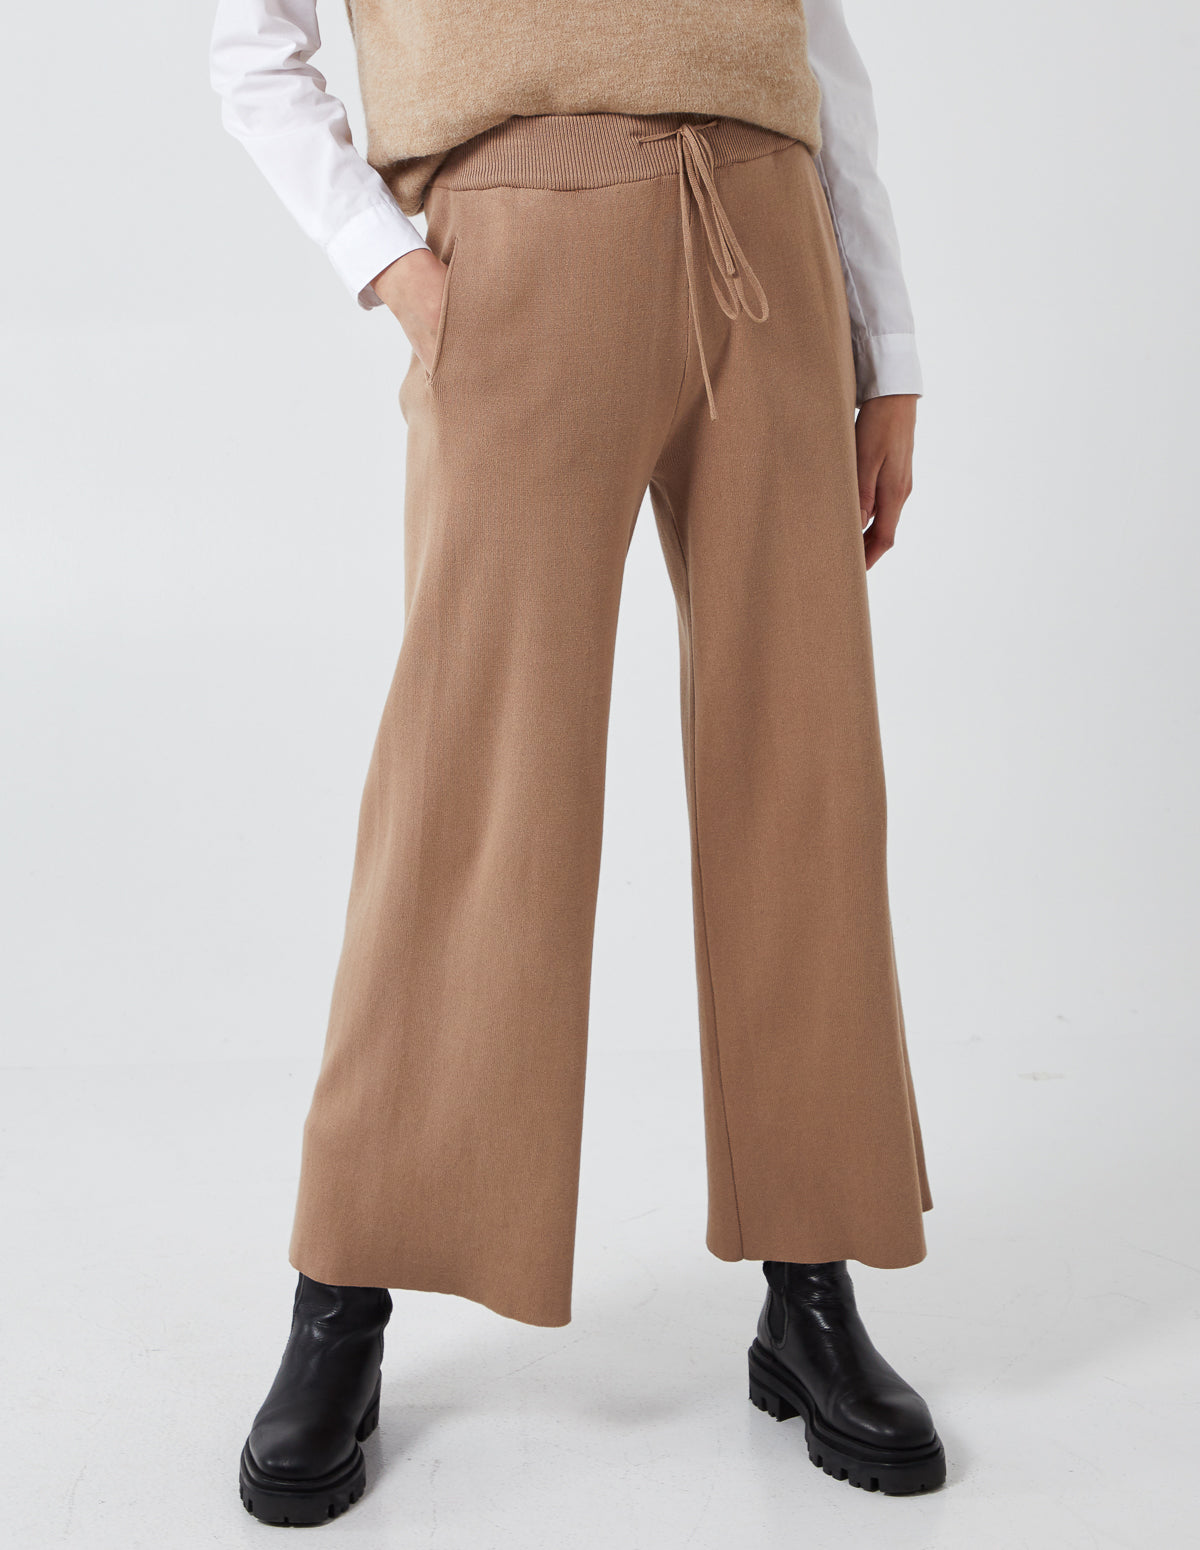 CHANTELLE - Knitted Drawstring Culottes - S